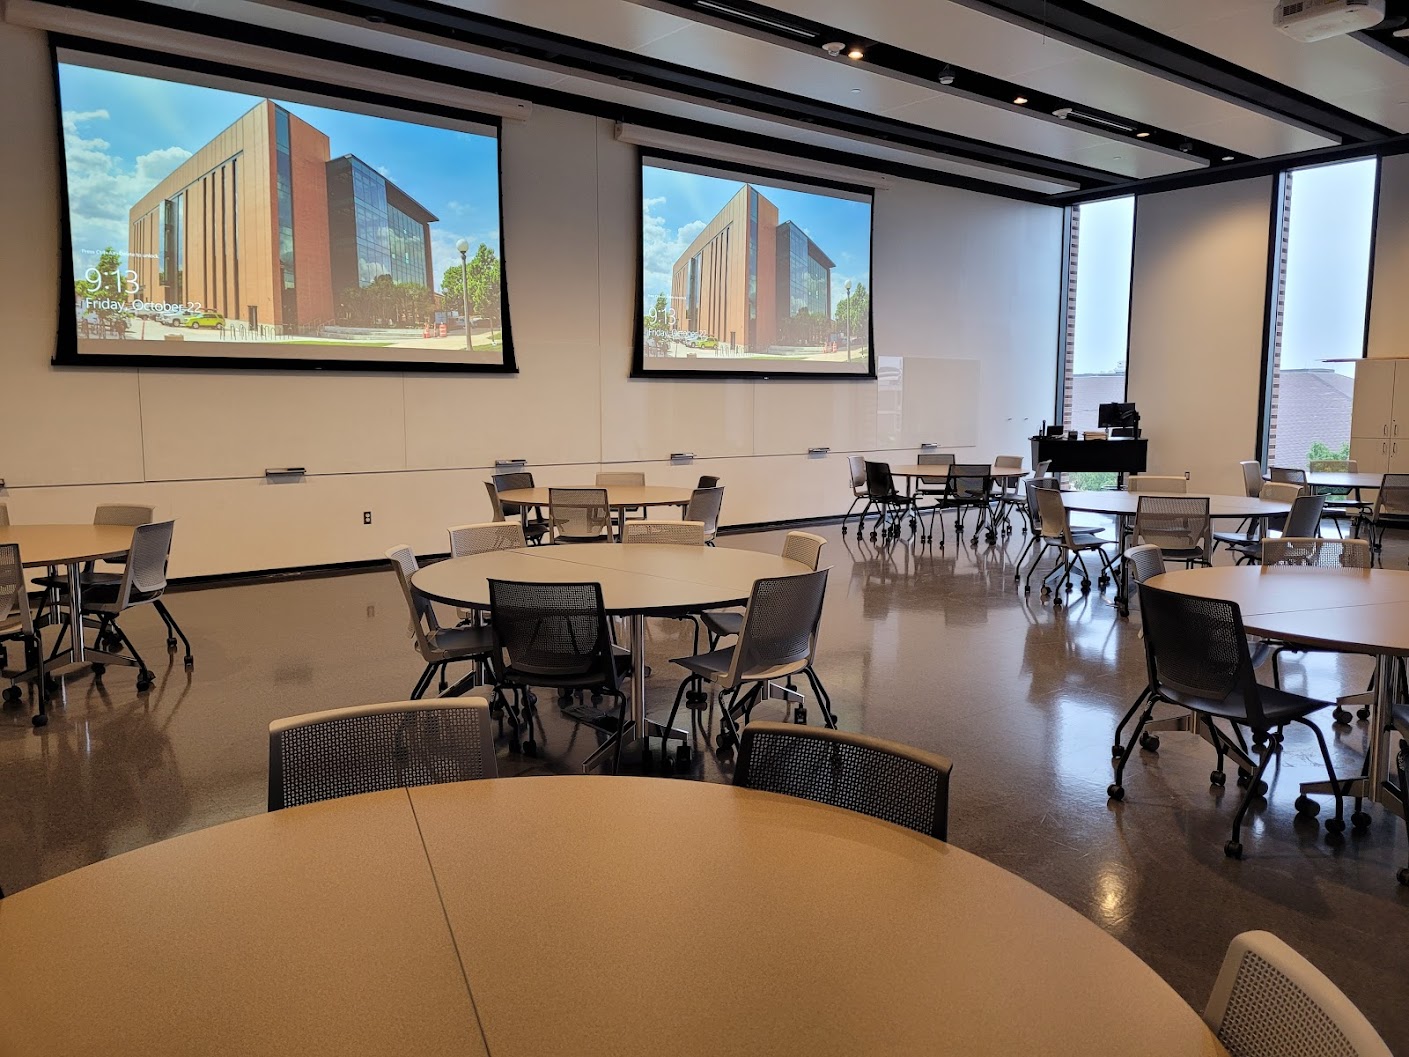 This is a view of the room with student desks, a front lecture table, and glass board